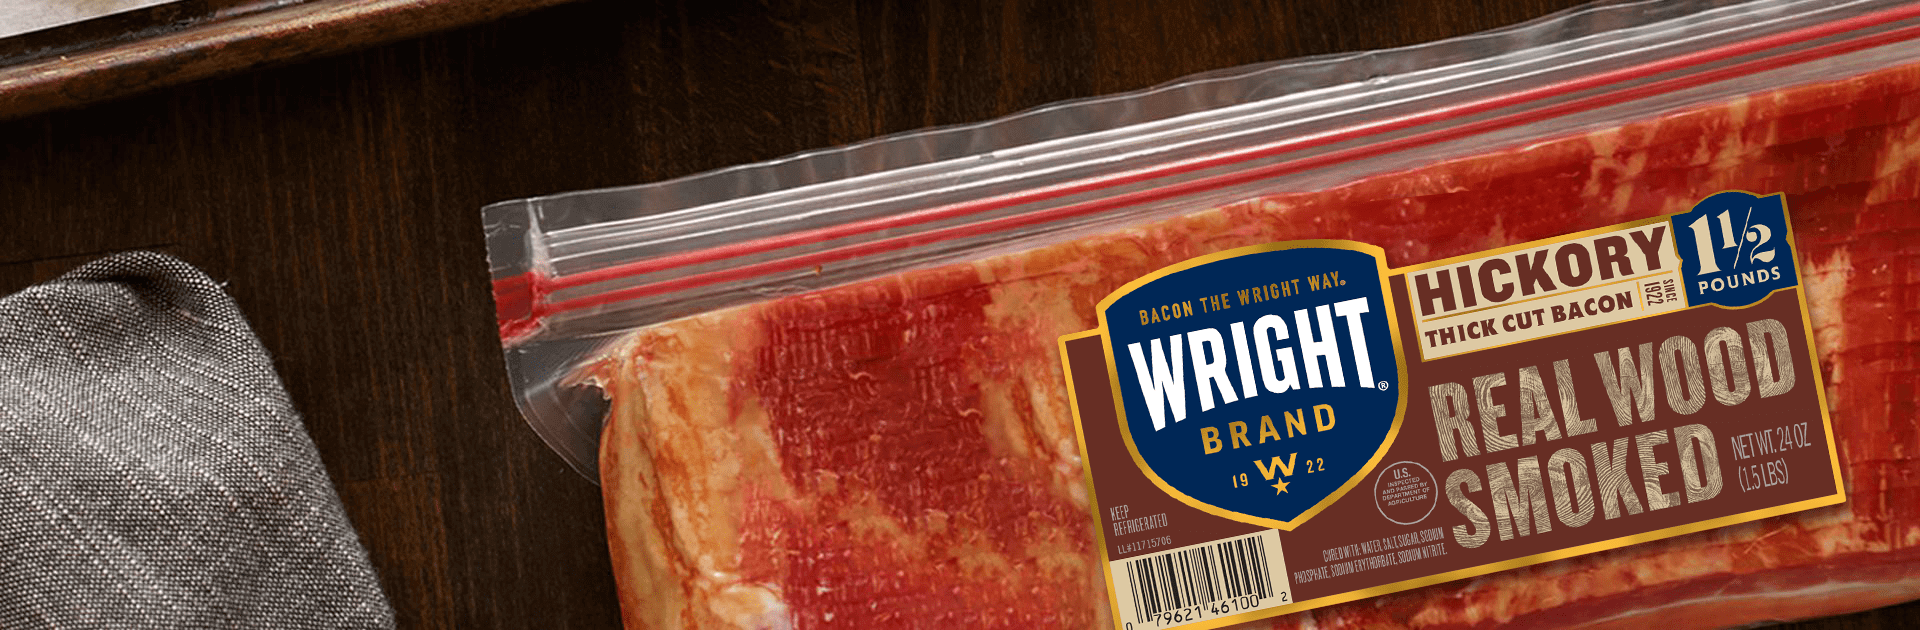 Wright Brand Hickory Smoked Bacon On Counter